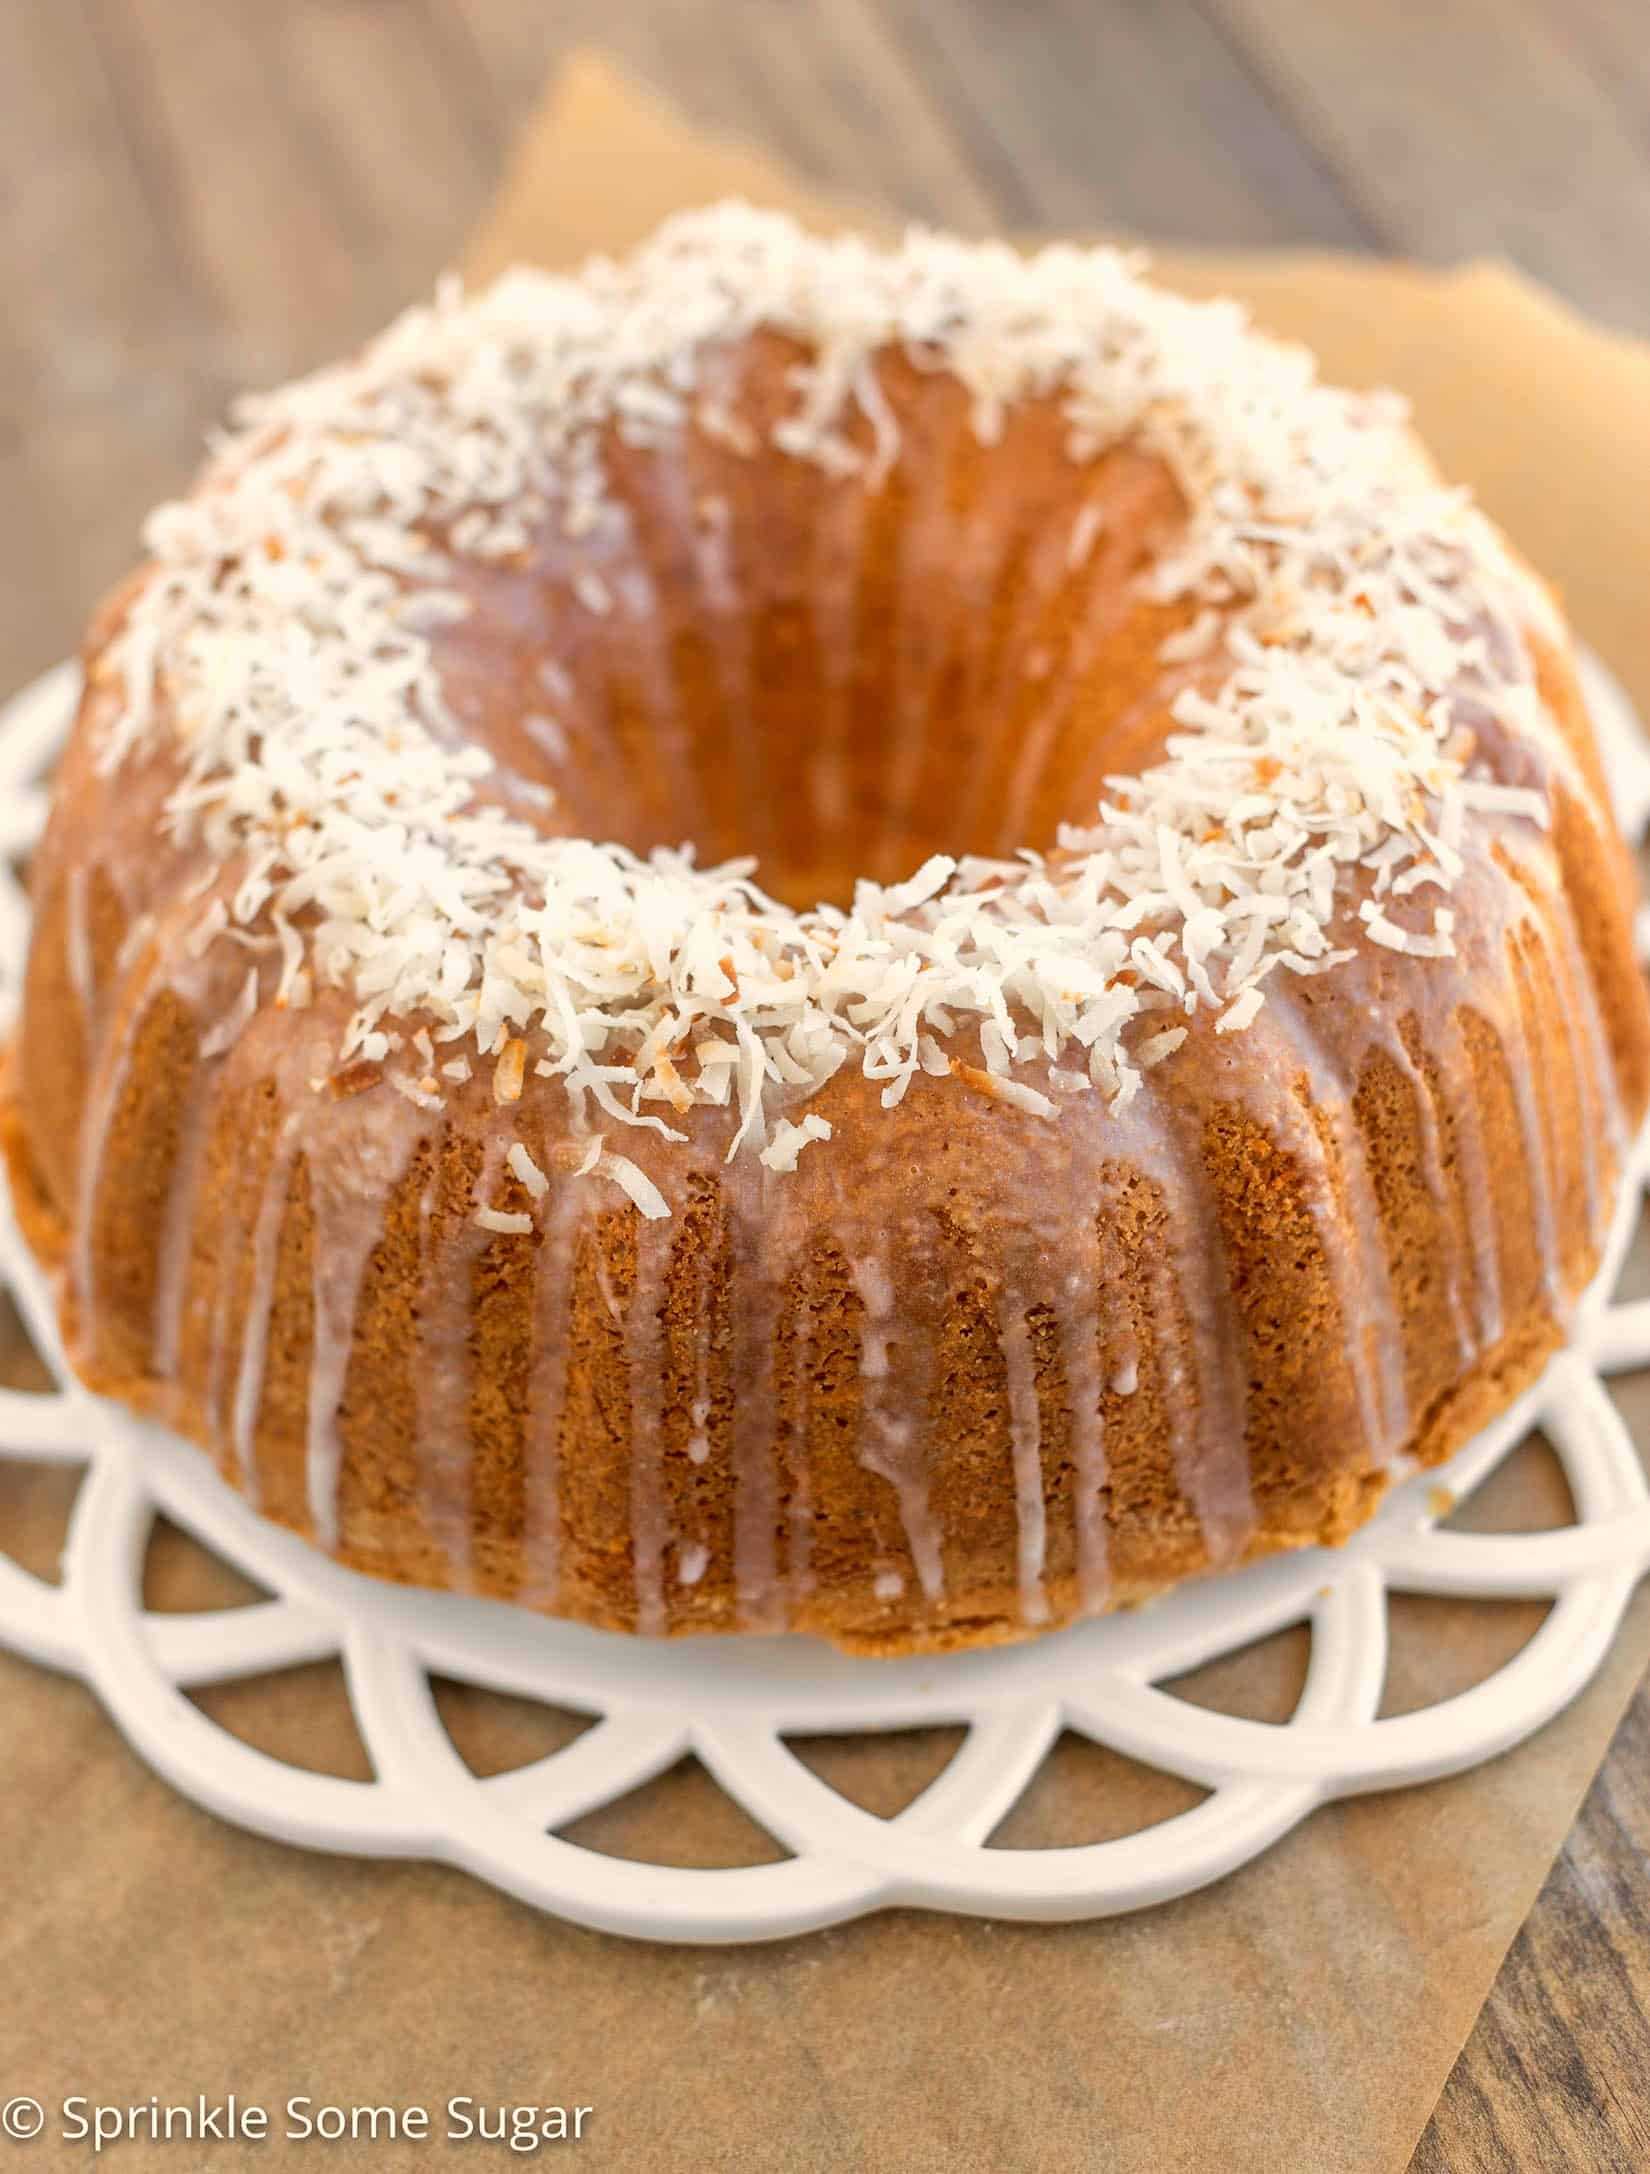 Coconut Pound Cake - This pound cake has the softest, velvet-y texture and is loaded with lots of coconut flavor.